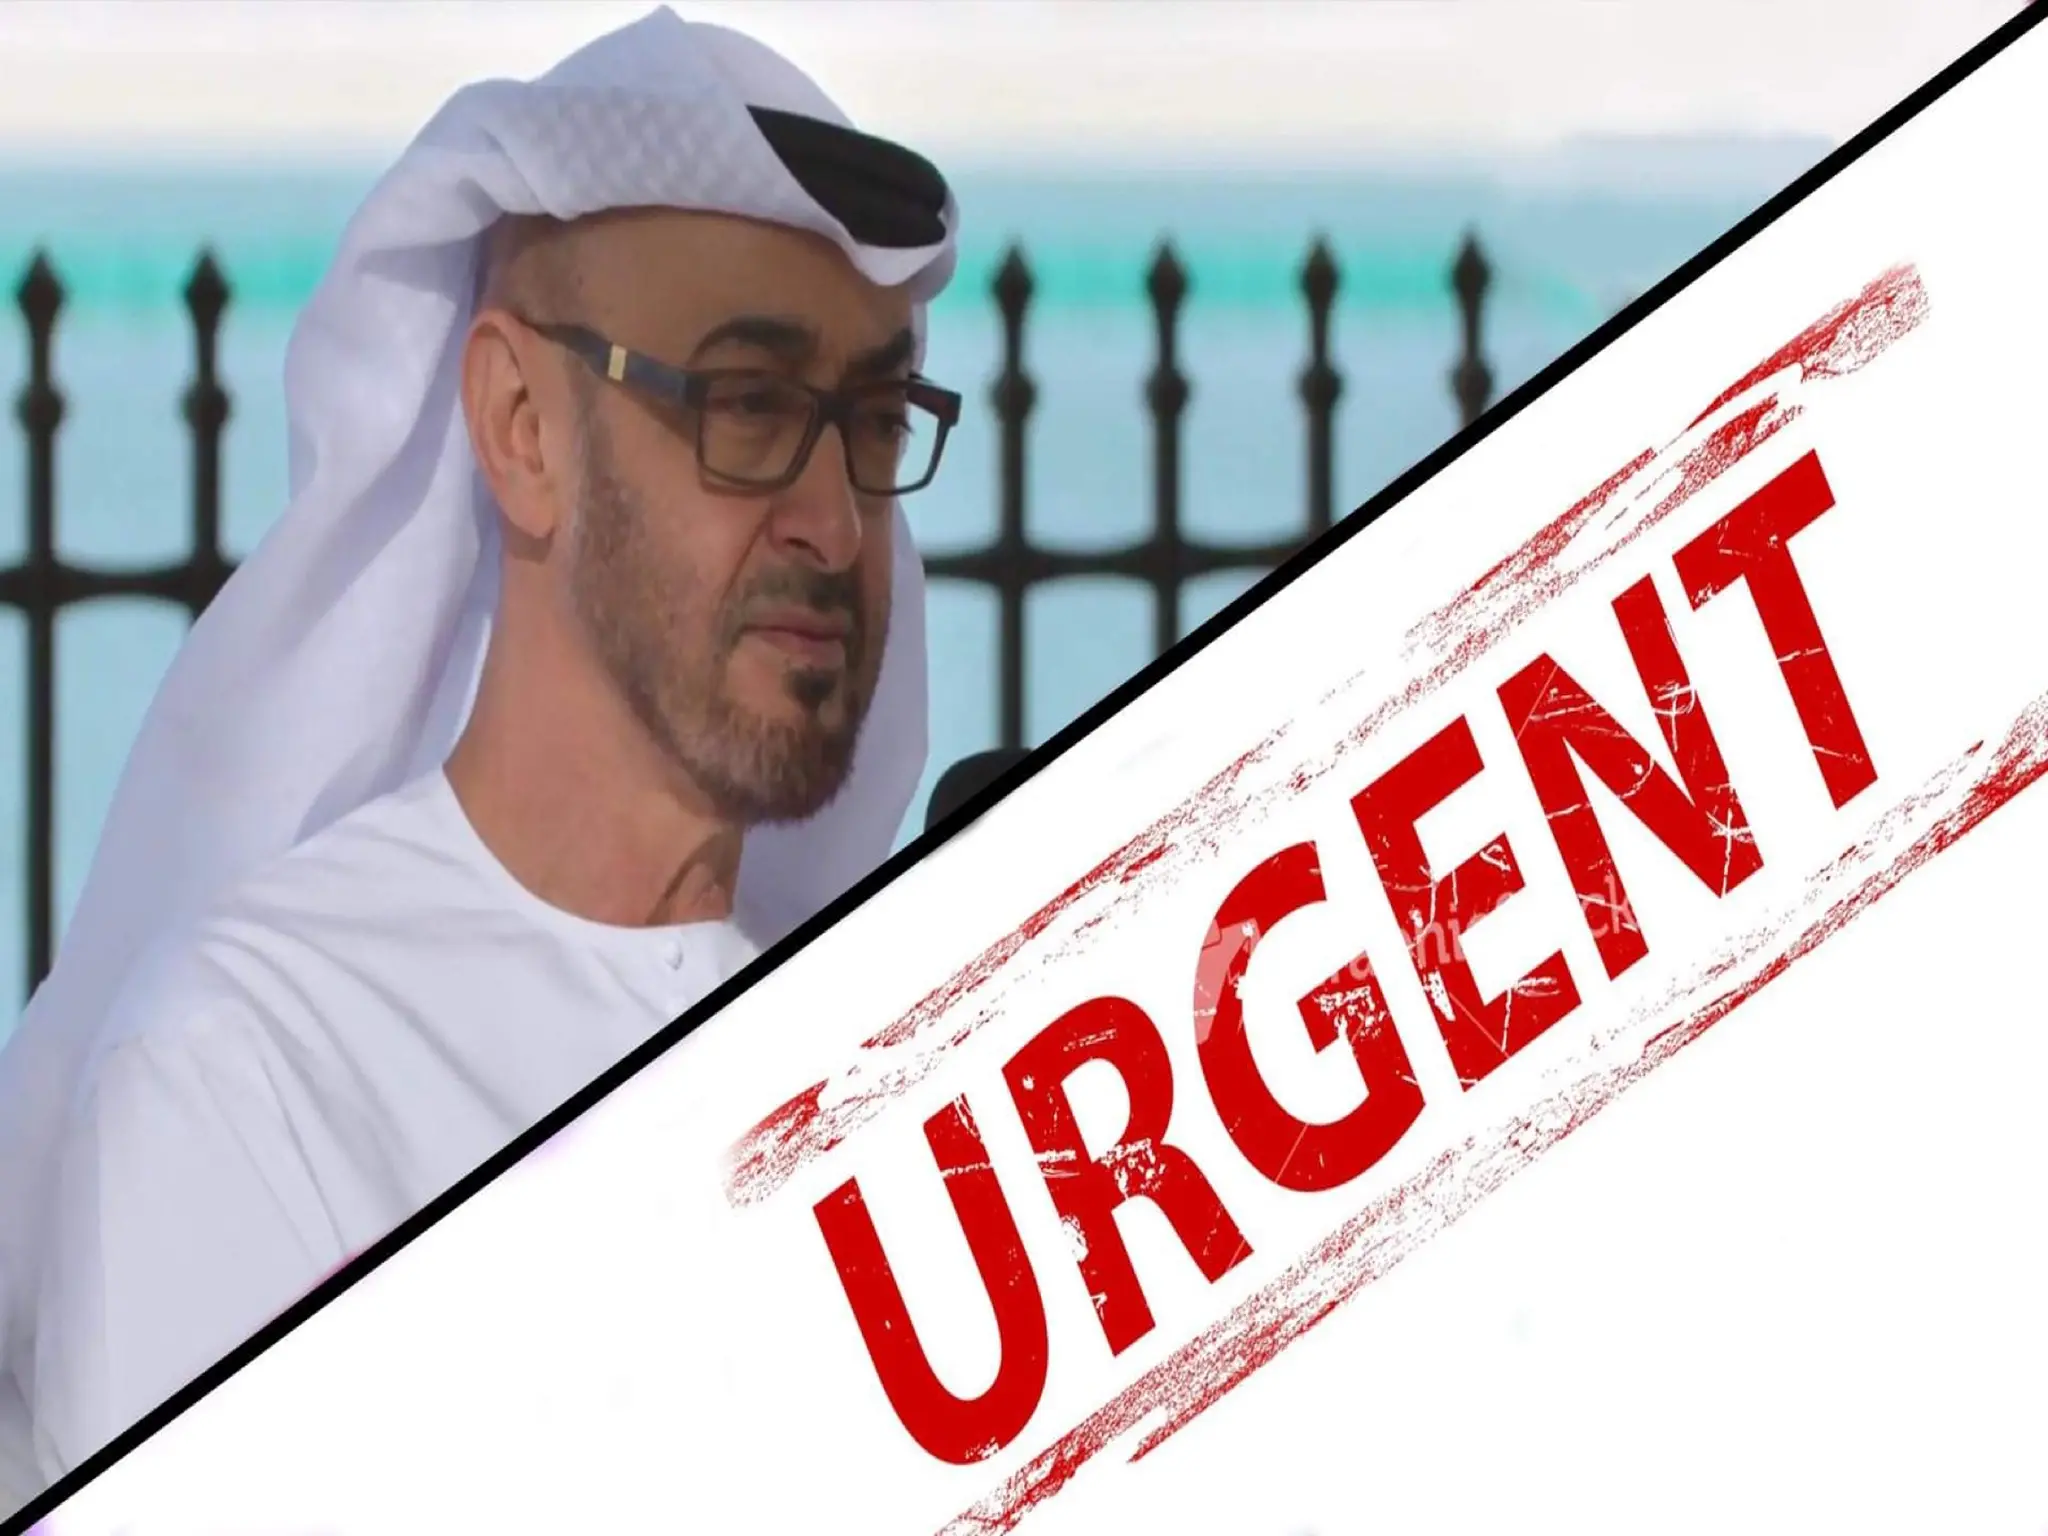 ‏Abu Dhabi: Statement regarding the insured in cases of “absence from work”